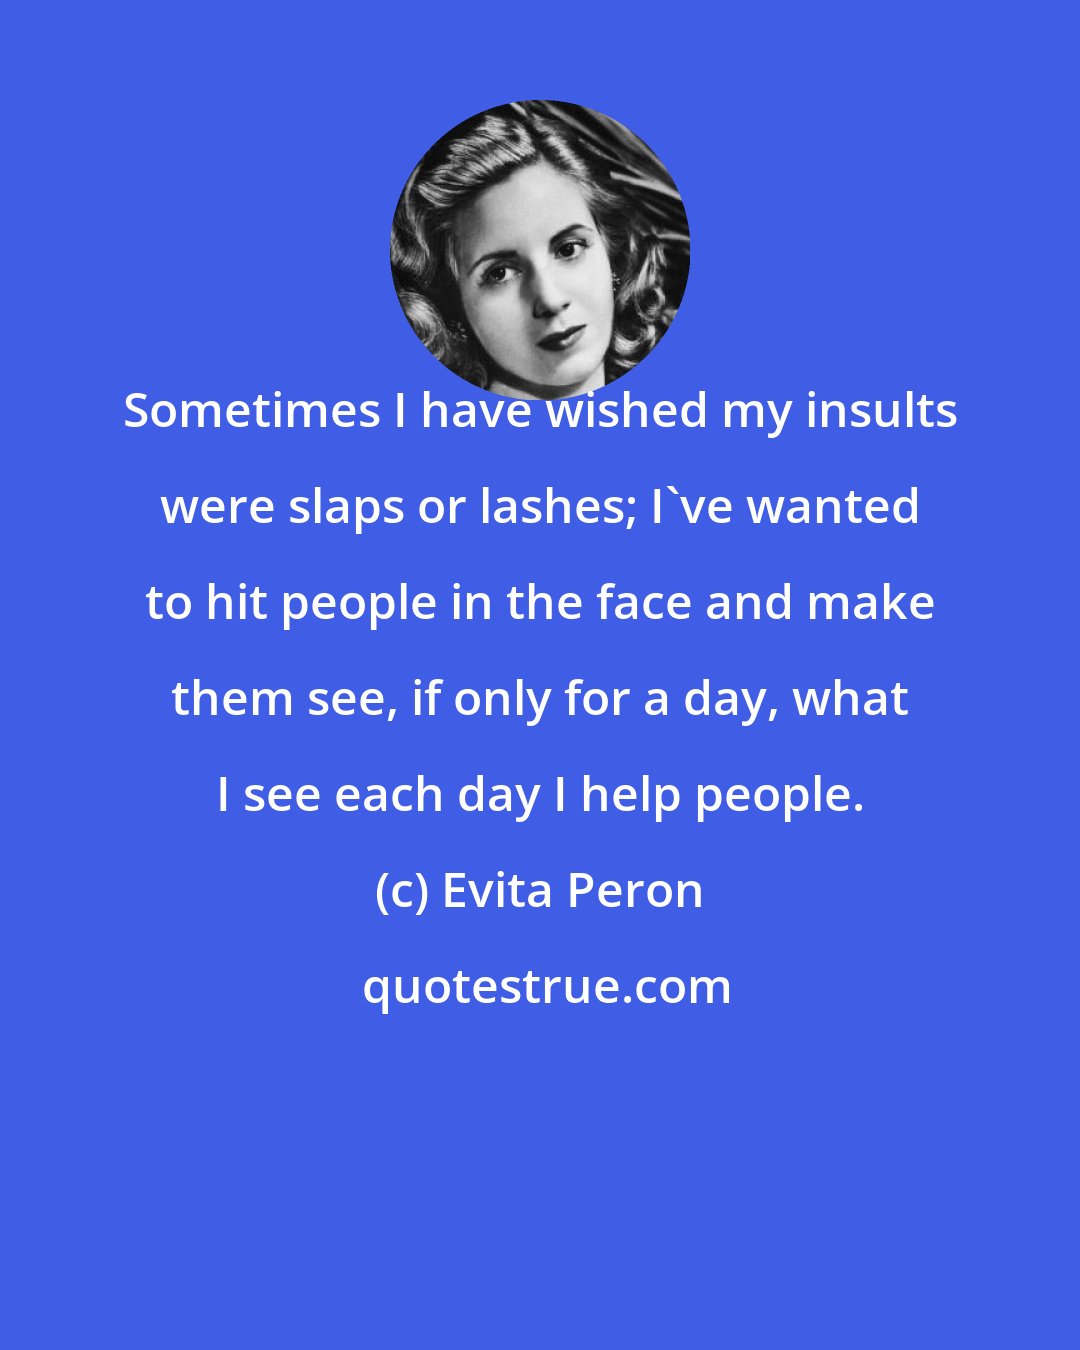 Evita Peron: Sometimes I have wished my insults were slaps or lashes; I've wanted to hit people in the face and make them see, if only for a day, what I see each day I help people.